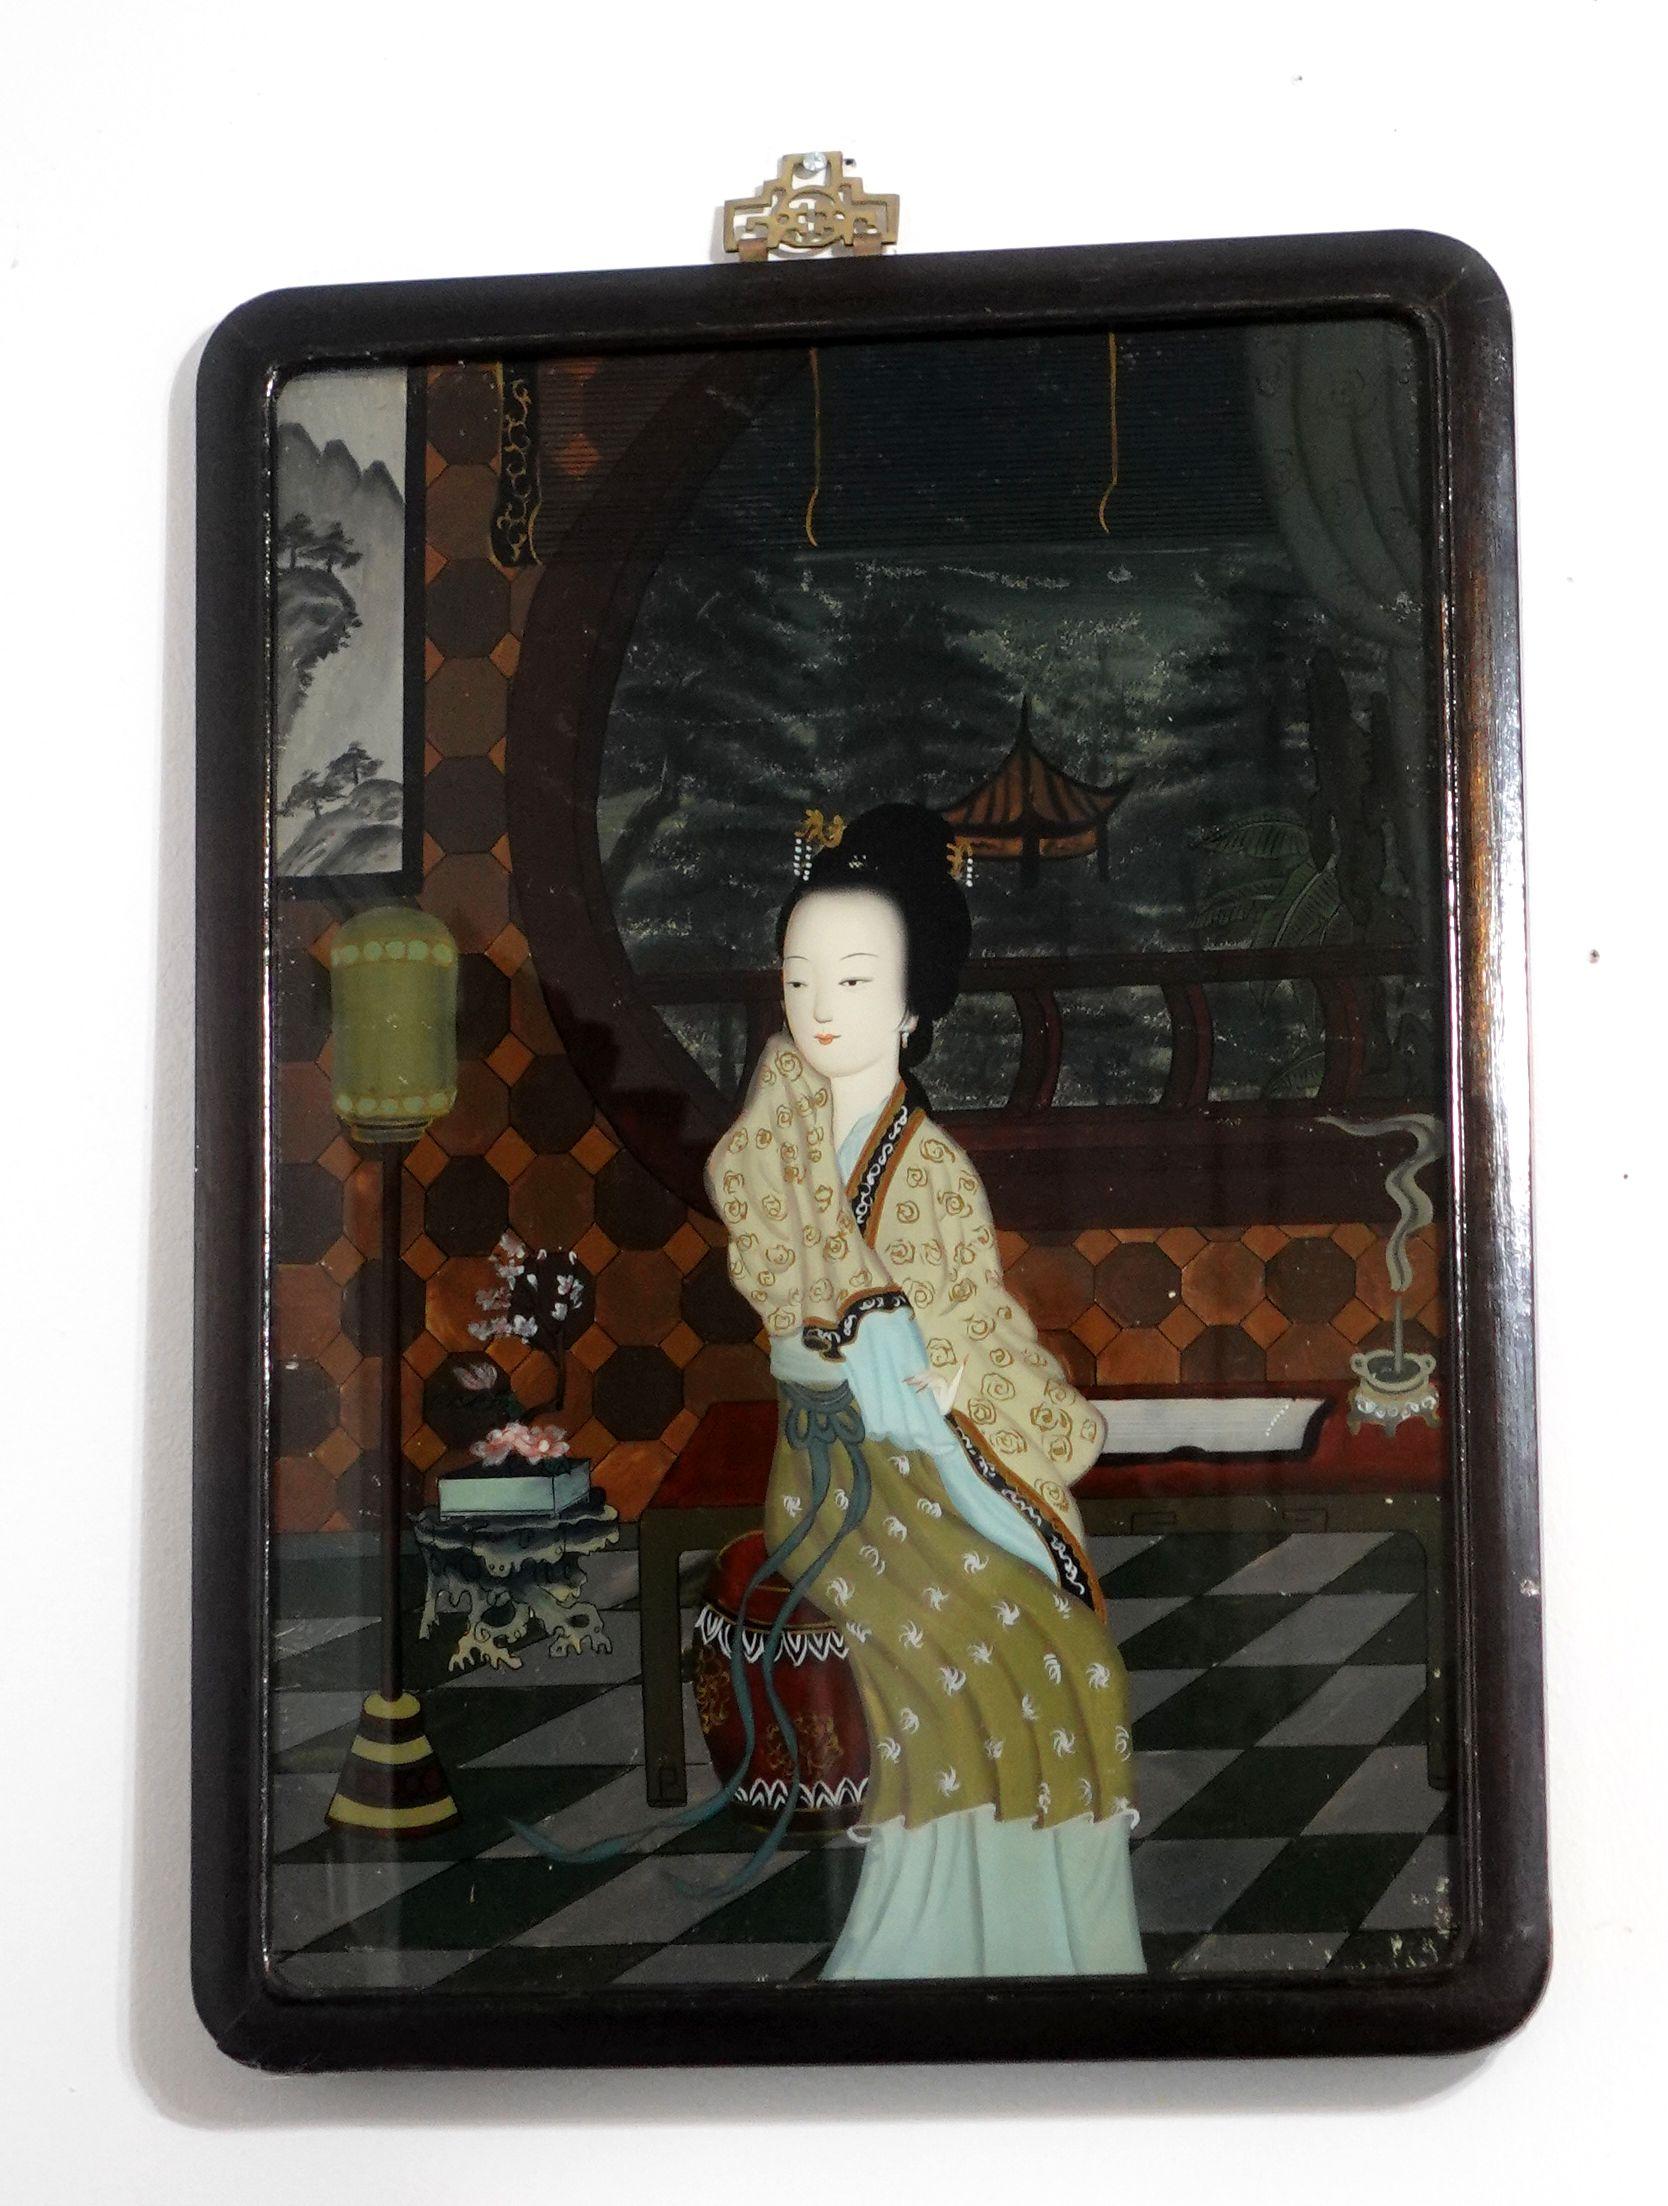 A charming late 19th-century to early 20th-century, Chinese export reverse glass painting, depicting a lady seating in the living room and an outdoor garden behind. The decoration in the room is presenting a very traditional Chinese character with